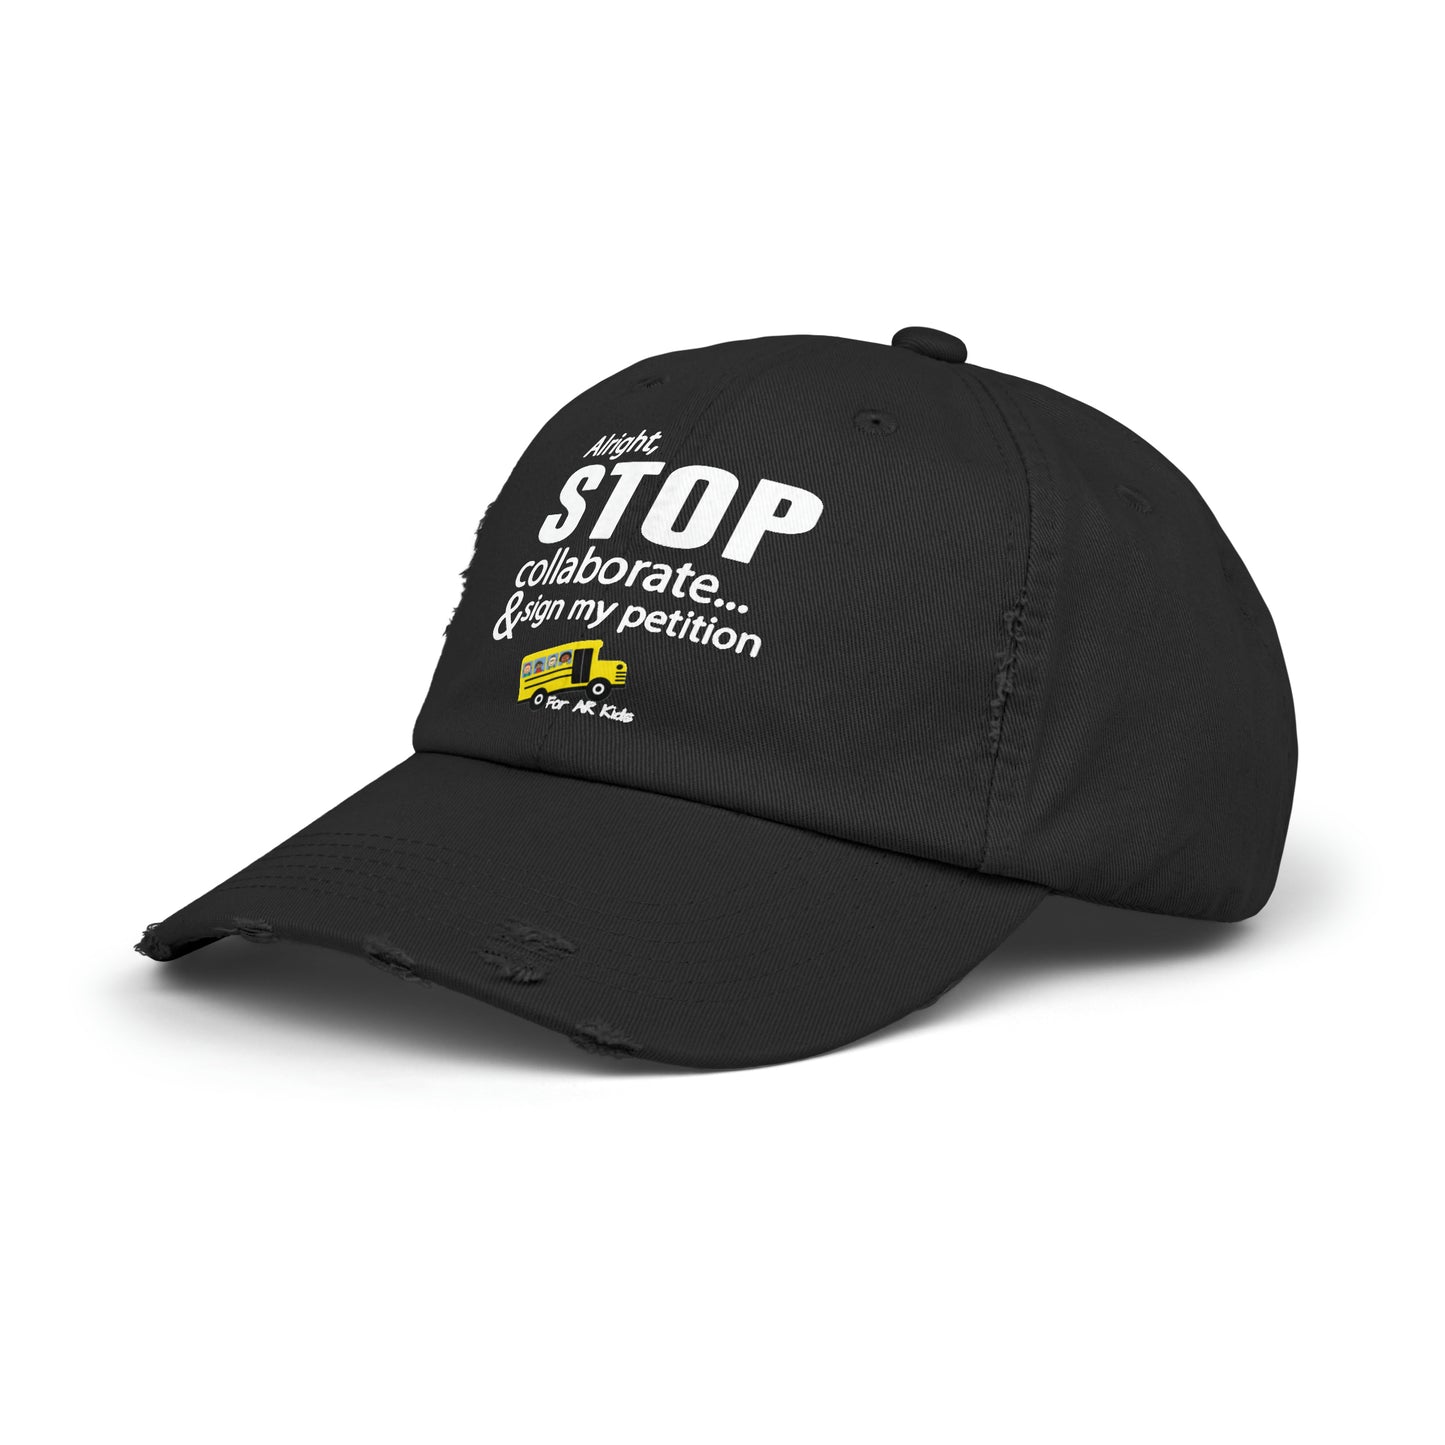 Alright Stop Collaborate and Sign My Petition Baseball Cap, AR Kids Hat, Distressed Cap